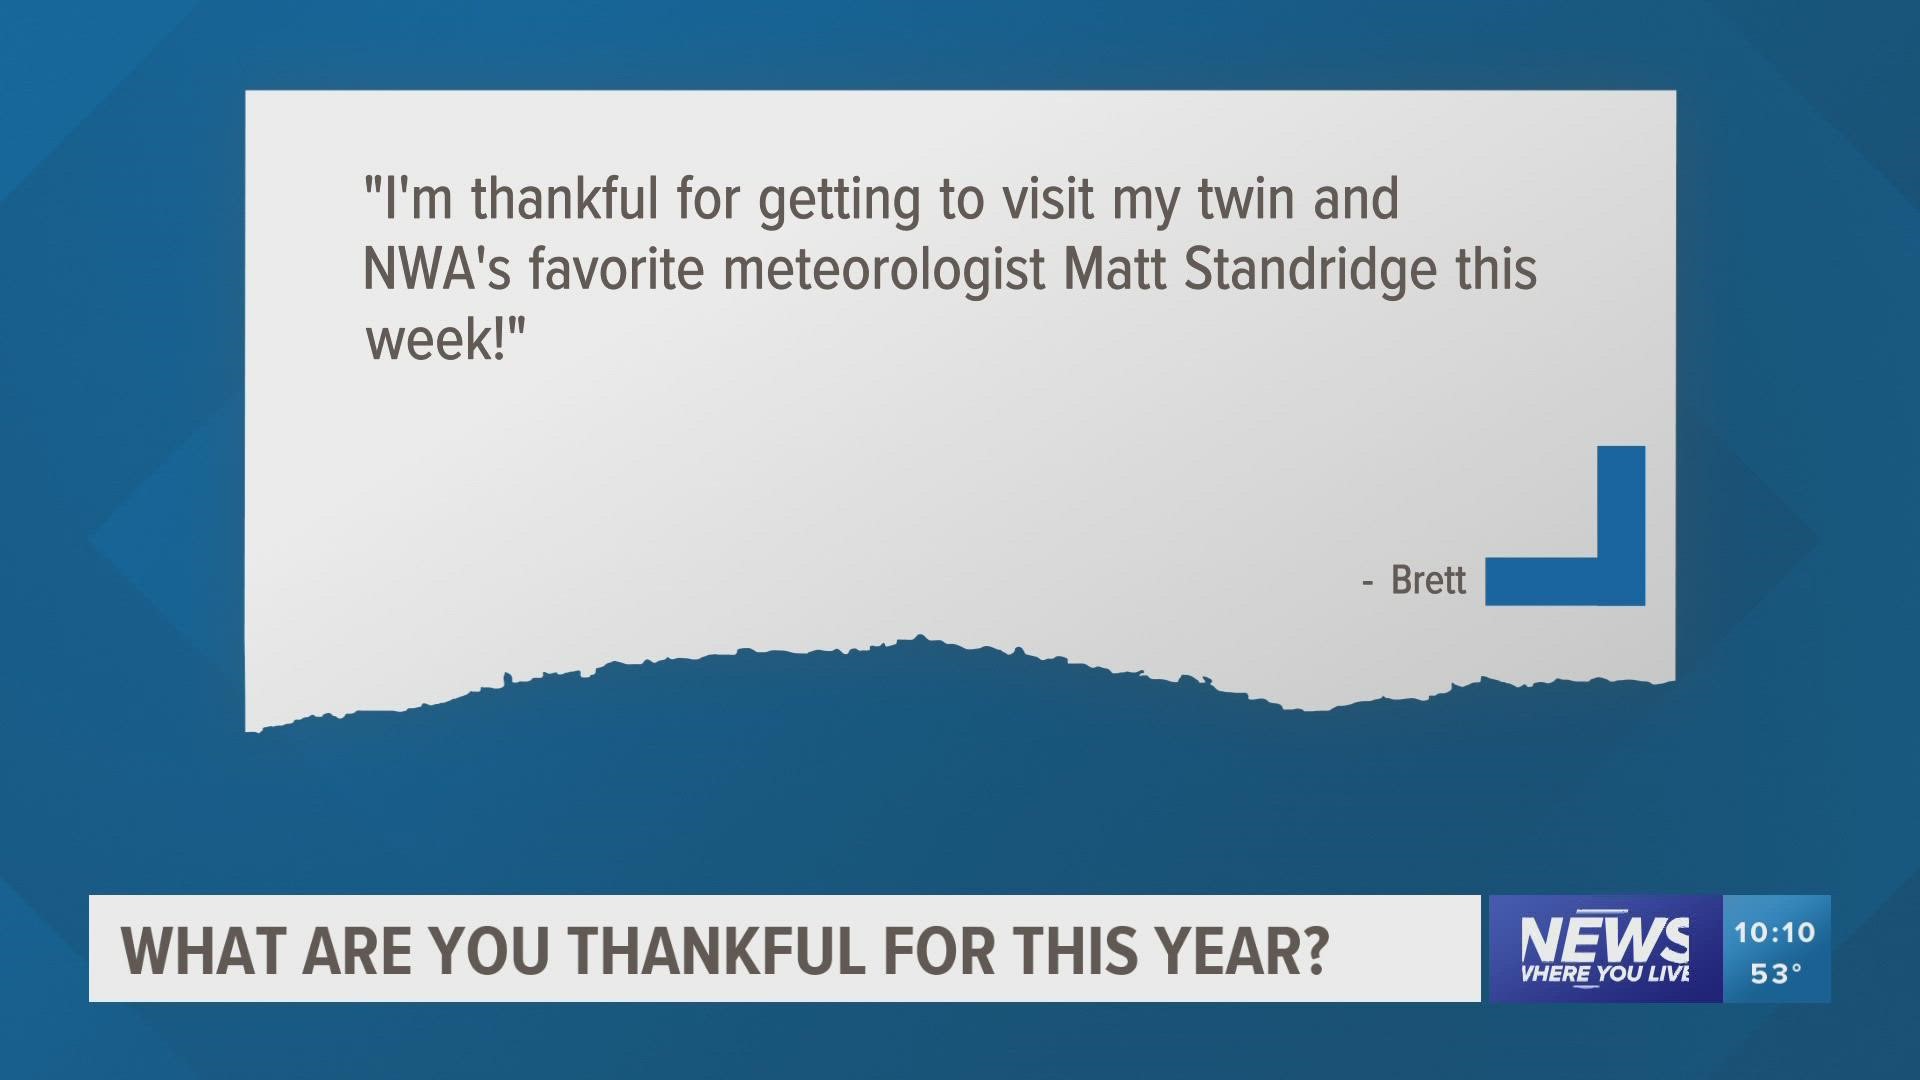 Brett texted Channel 5 that he was thankful for getting to visit his twin Matt Standridge for Thanksgiving.